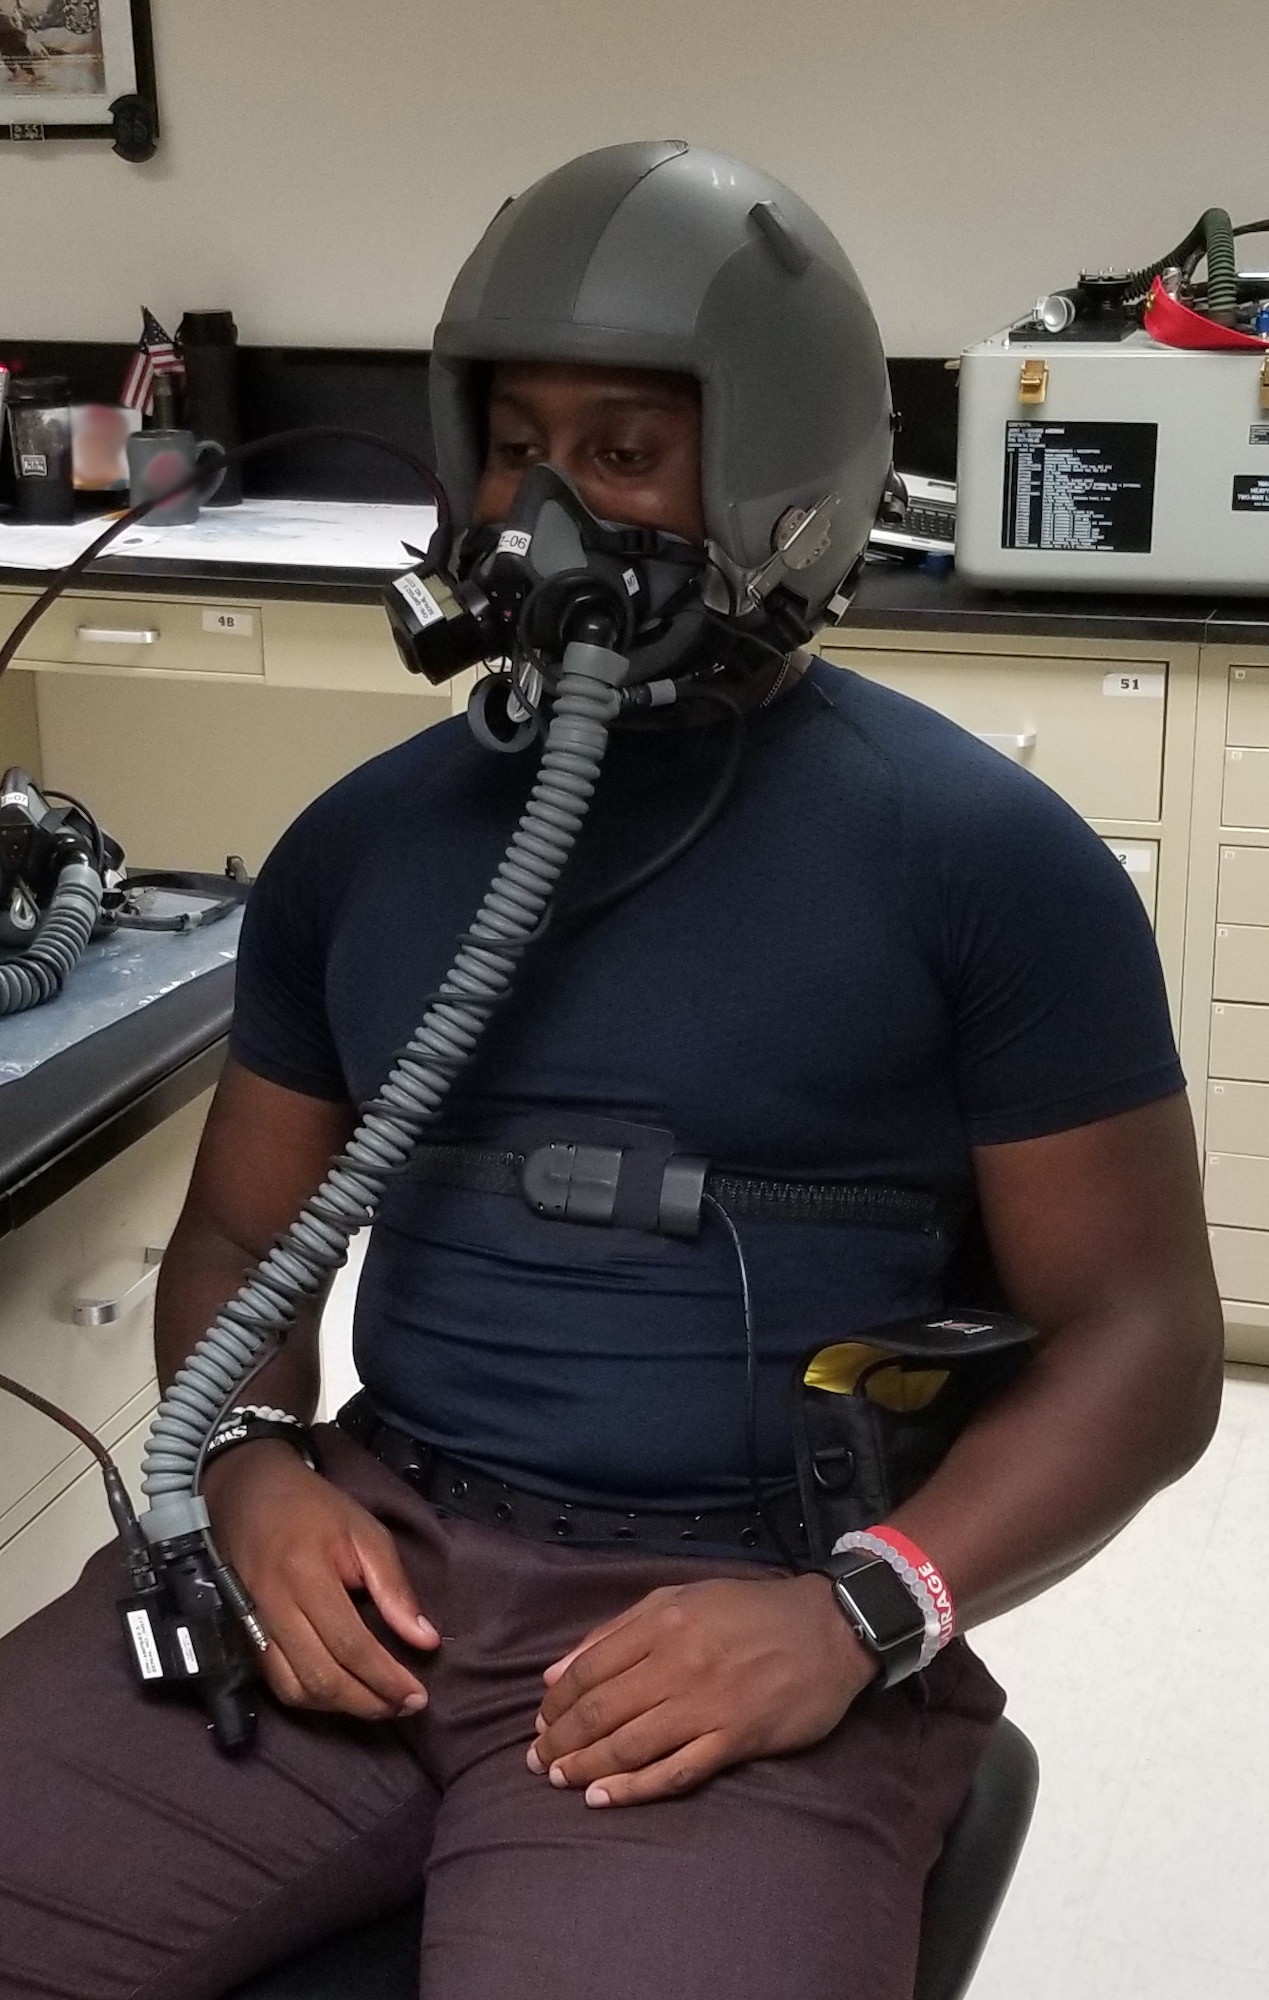 Anthony Turner, a research consultant with the 711th Human Performance Wing at Wright-Patterson Air Force Base, Ohio, wears PHYSIO, a compression undershirt, during lab testing. The undershirt is designed to provide continuous monitoring of multiple vital signs while in flight to enhance aircrew safety. (Courtesy photo illustration)